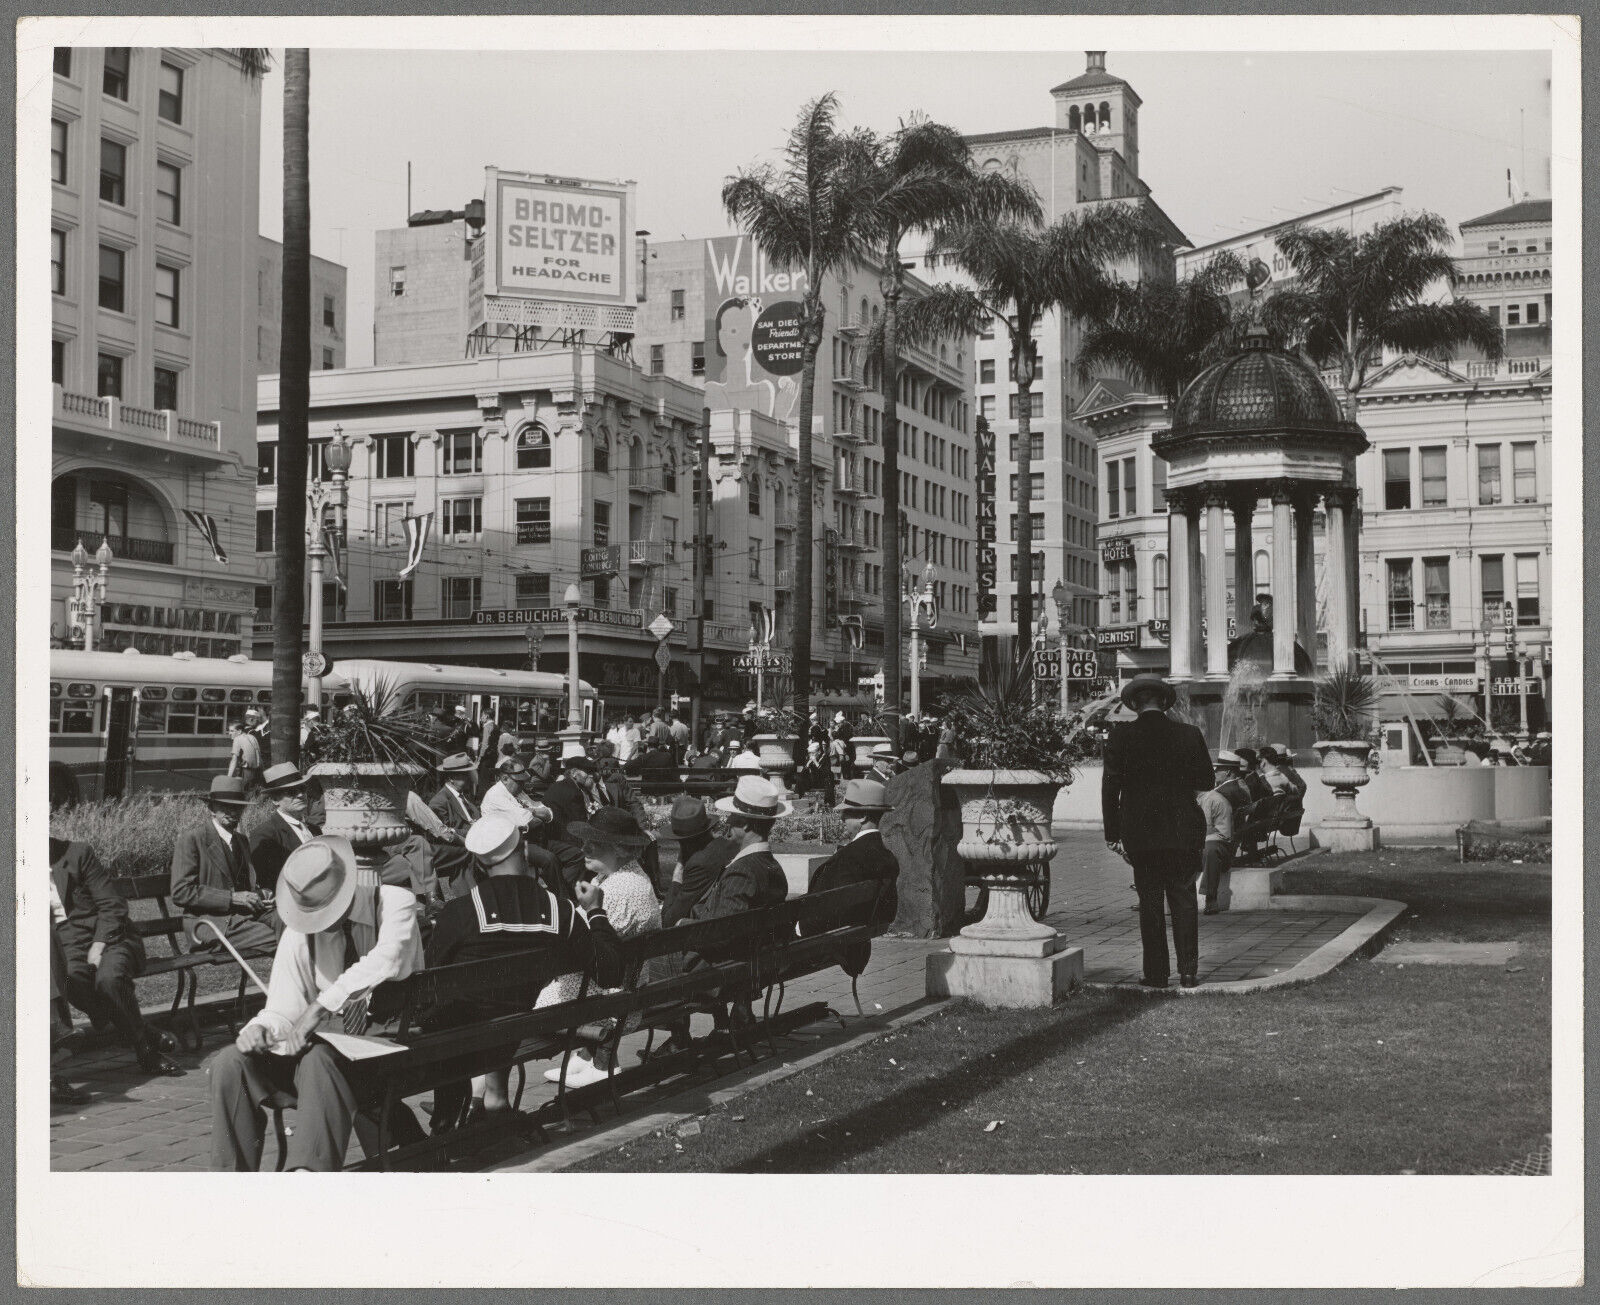 Old 8X10 Photo, 1930's View of square in midtown. San Diego, California 58110851